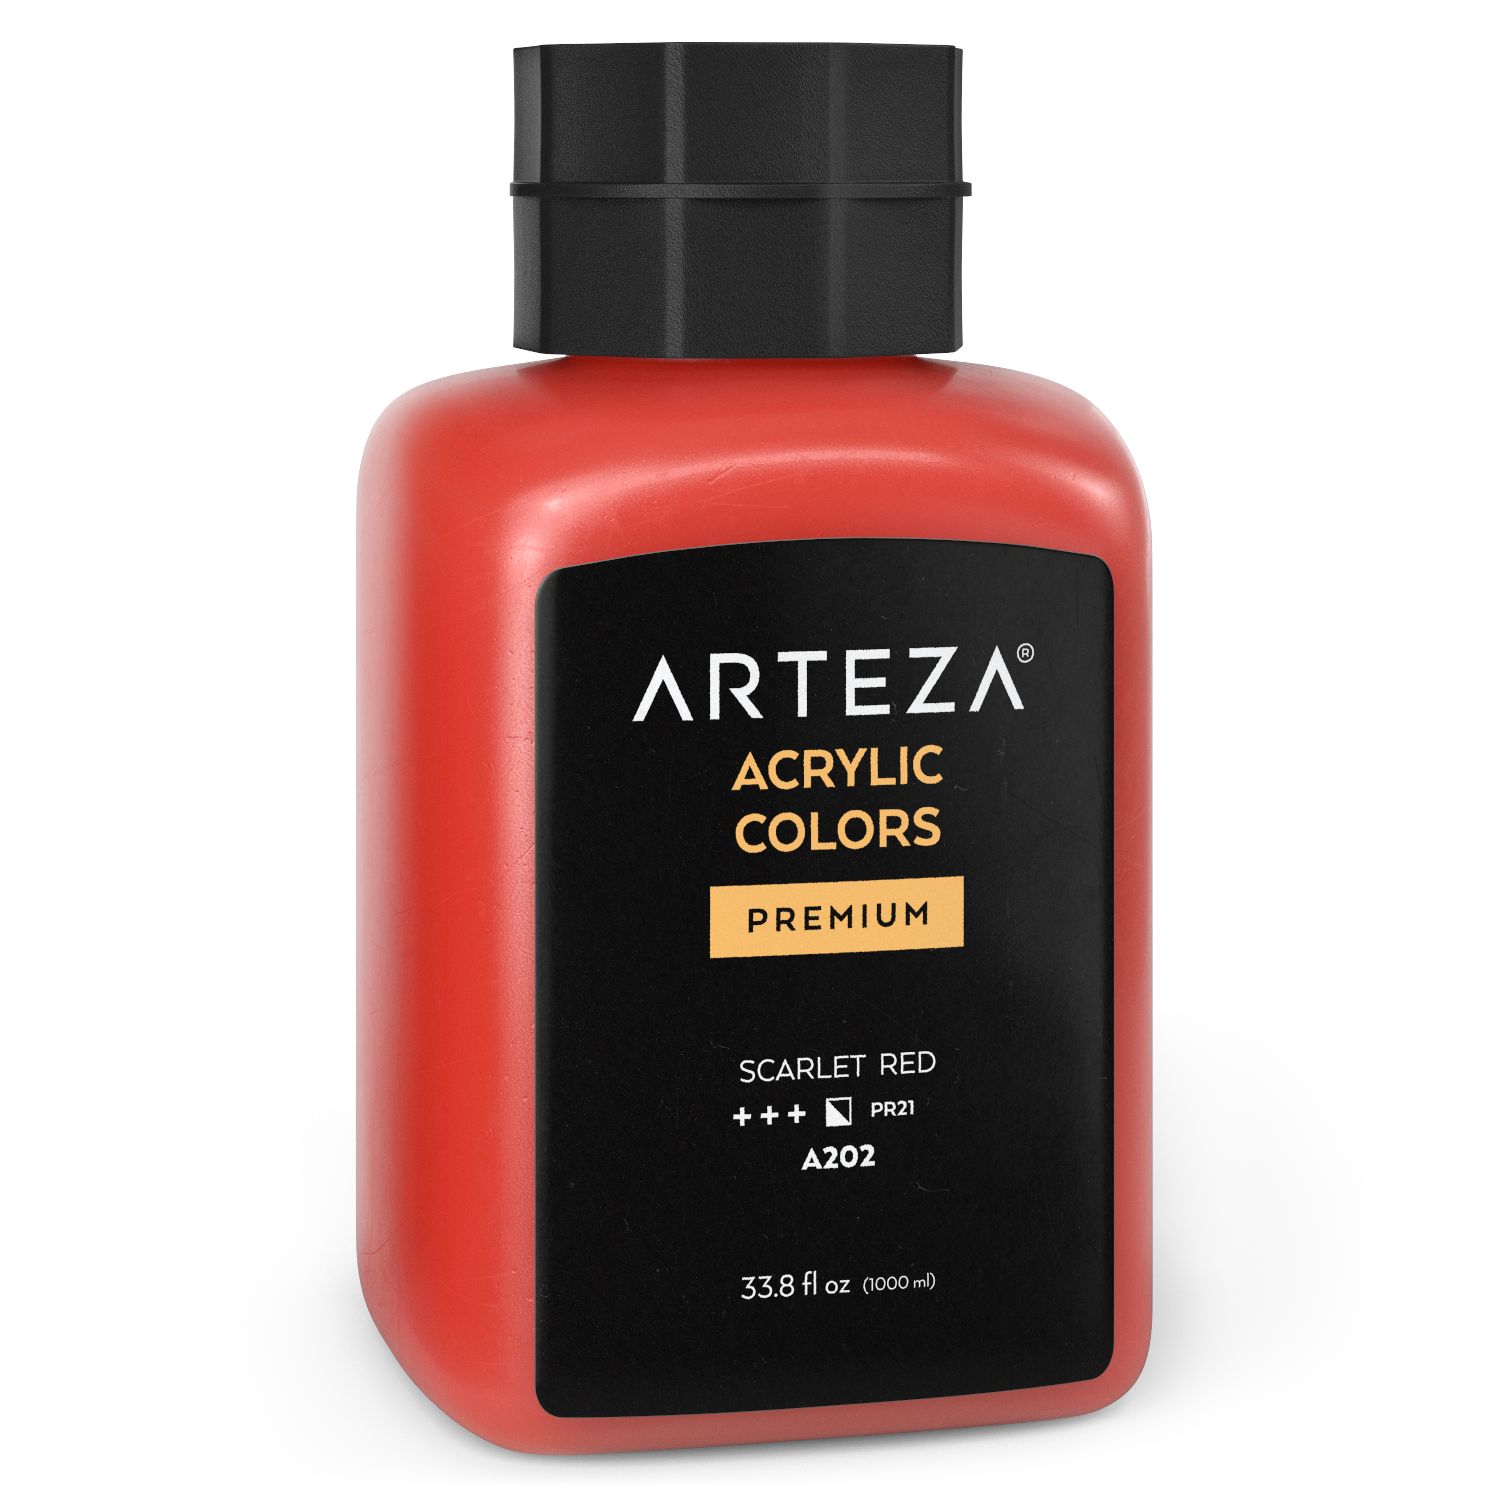 A202 Scarlet Red Acrylic Paint 34oz